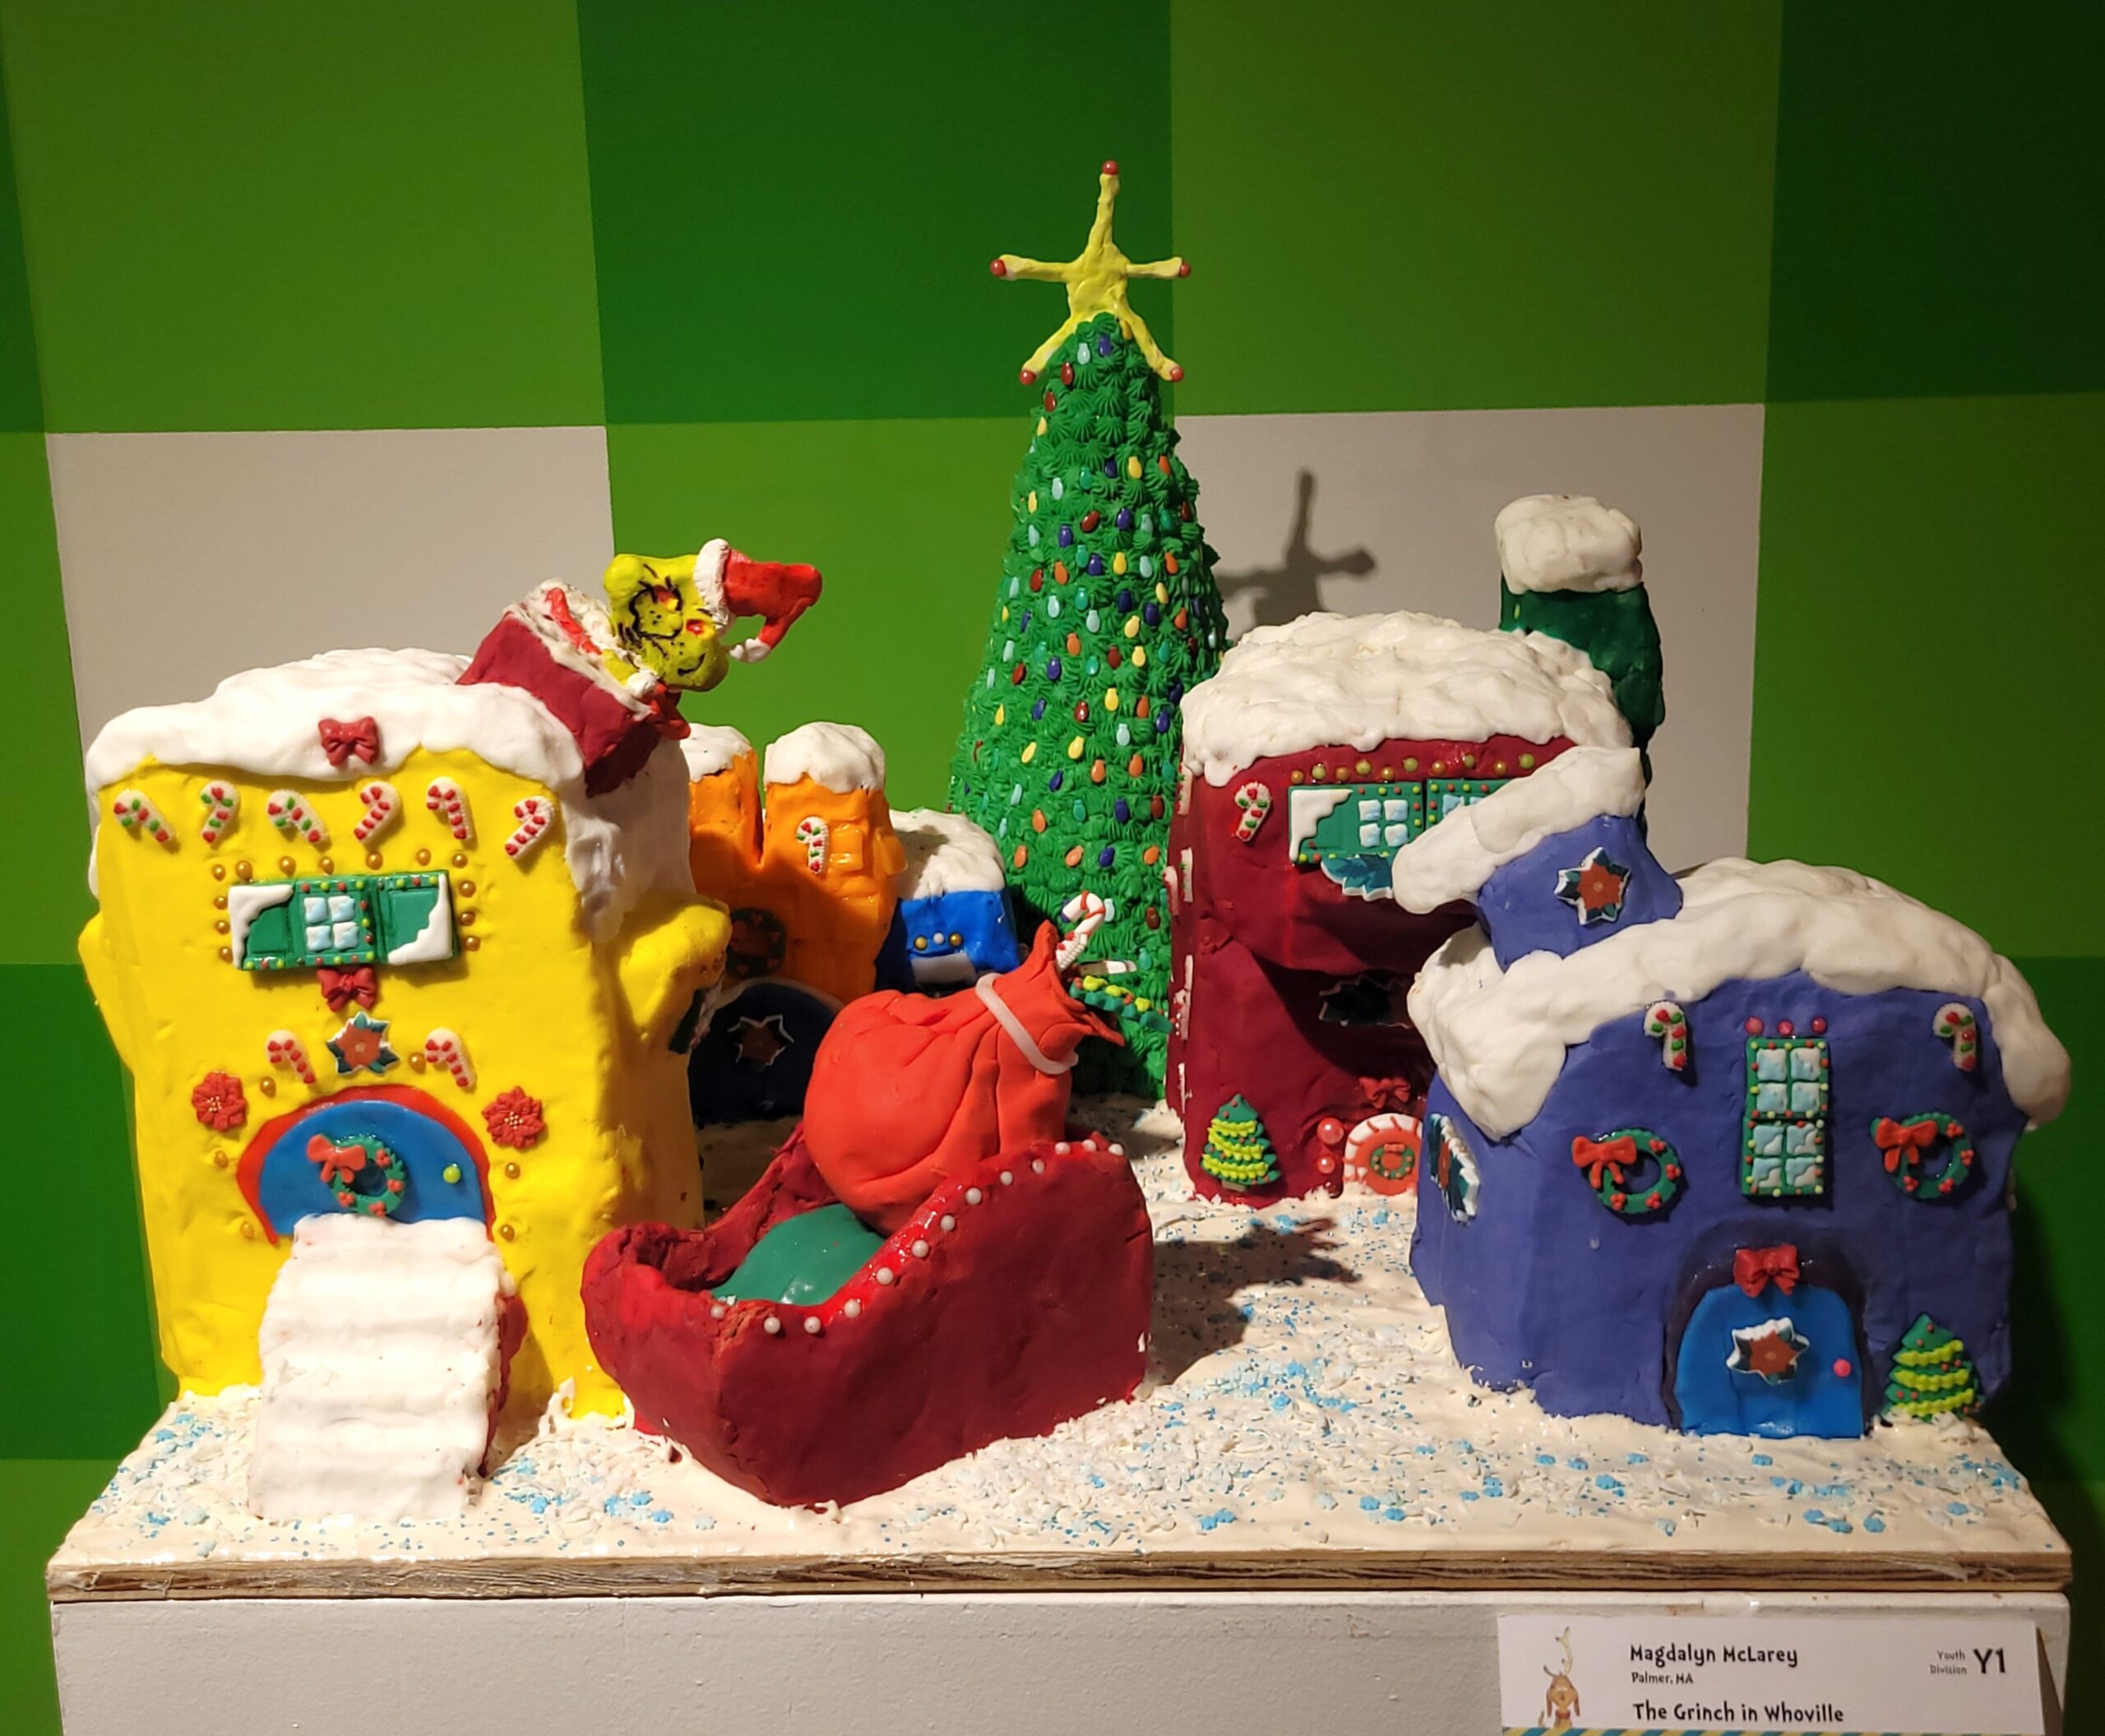 Gingerbread display titled "The Grinch in Whoville" by Magdalyn McLarey